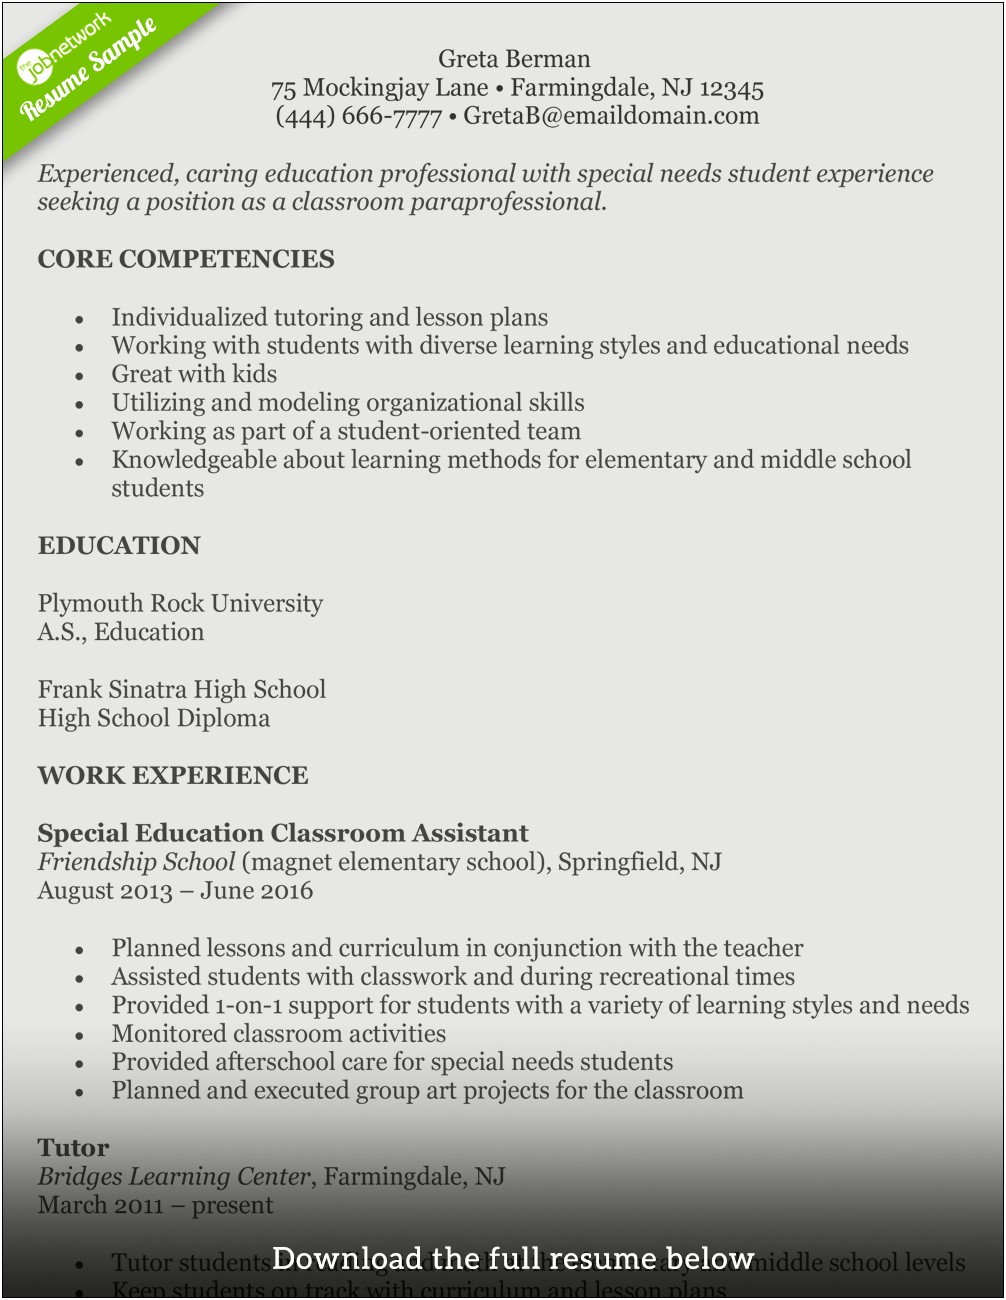 Resume Objective Examples For Child Care